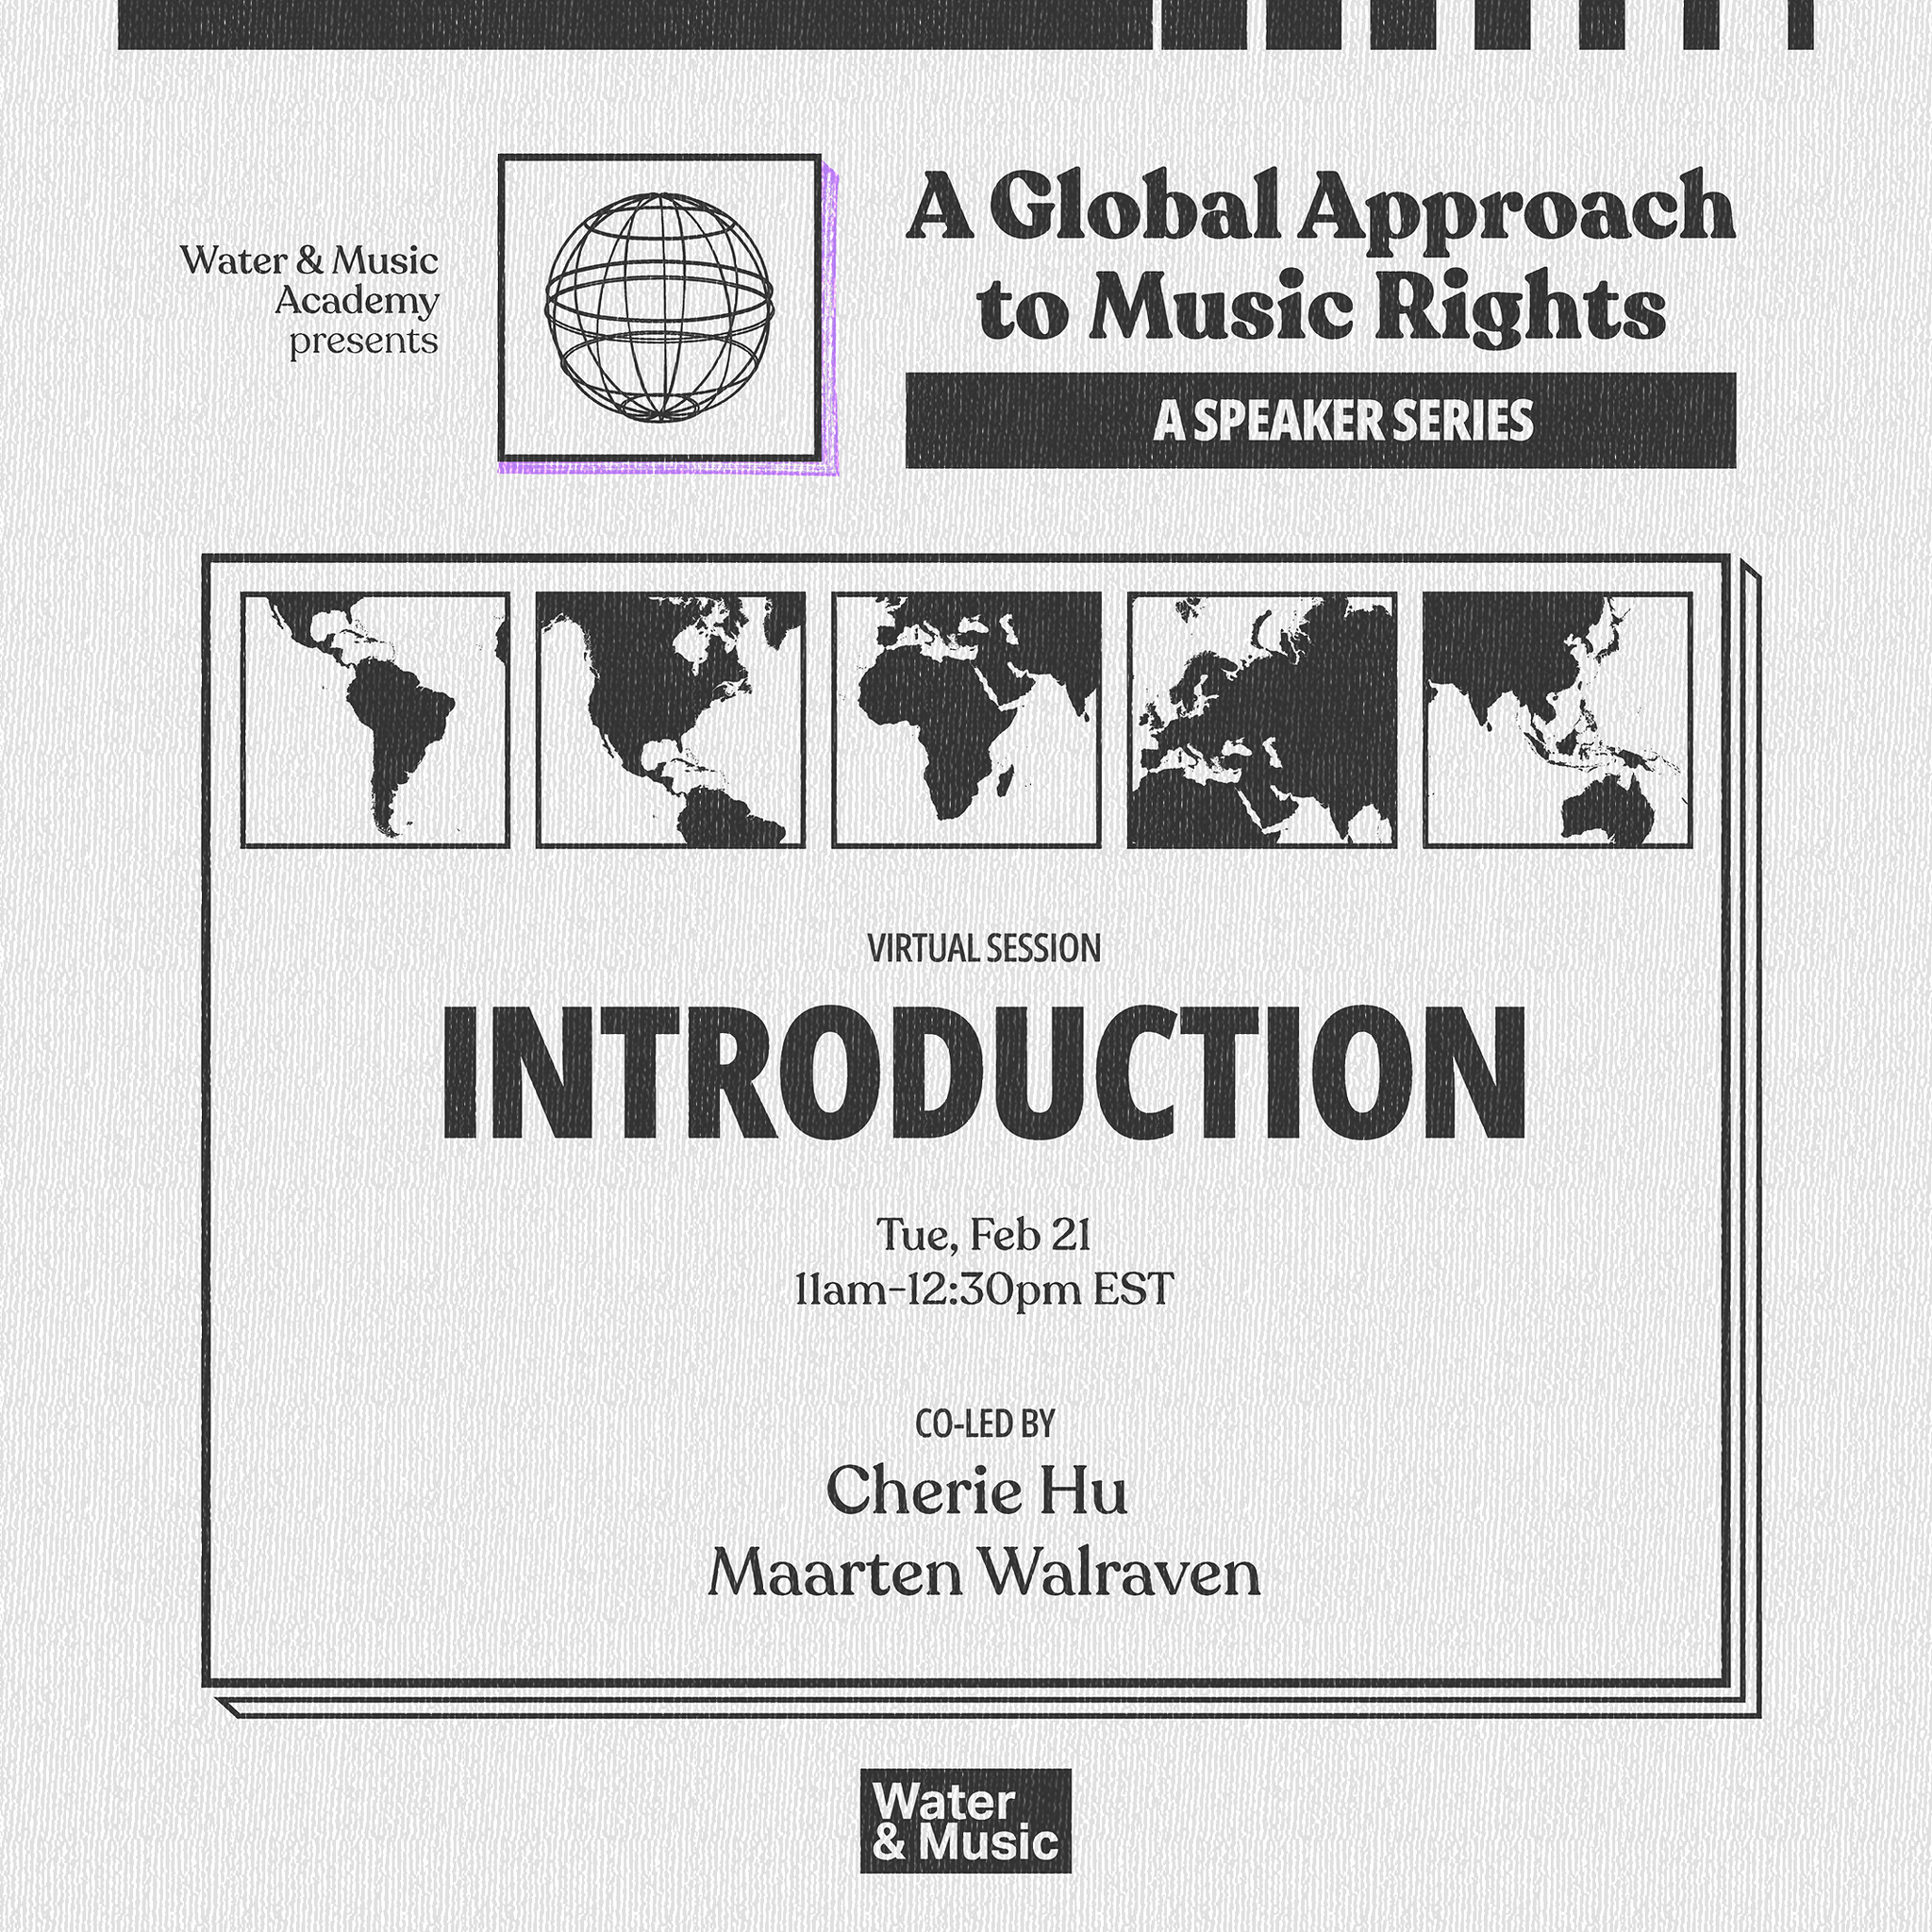 Global Music Rights